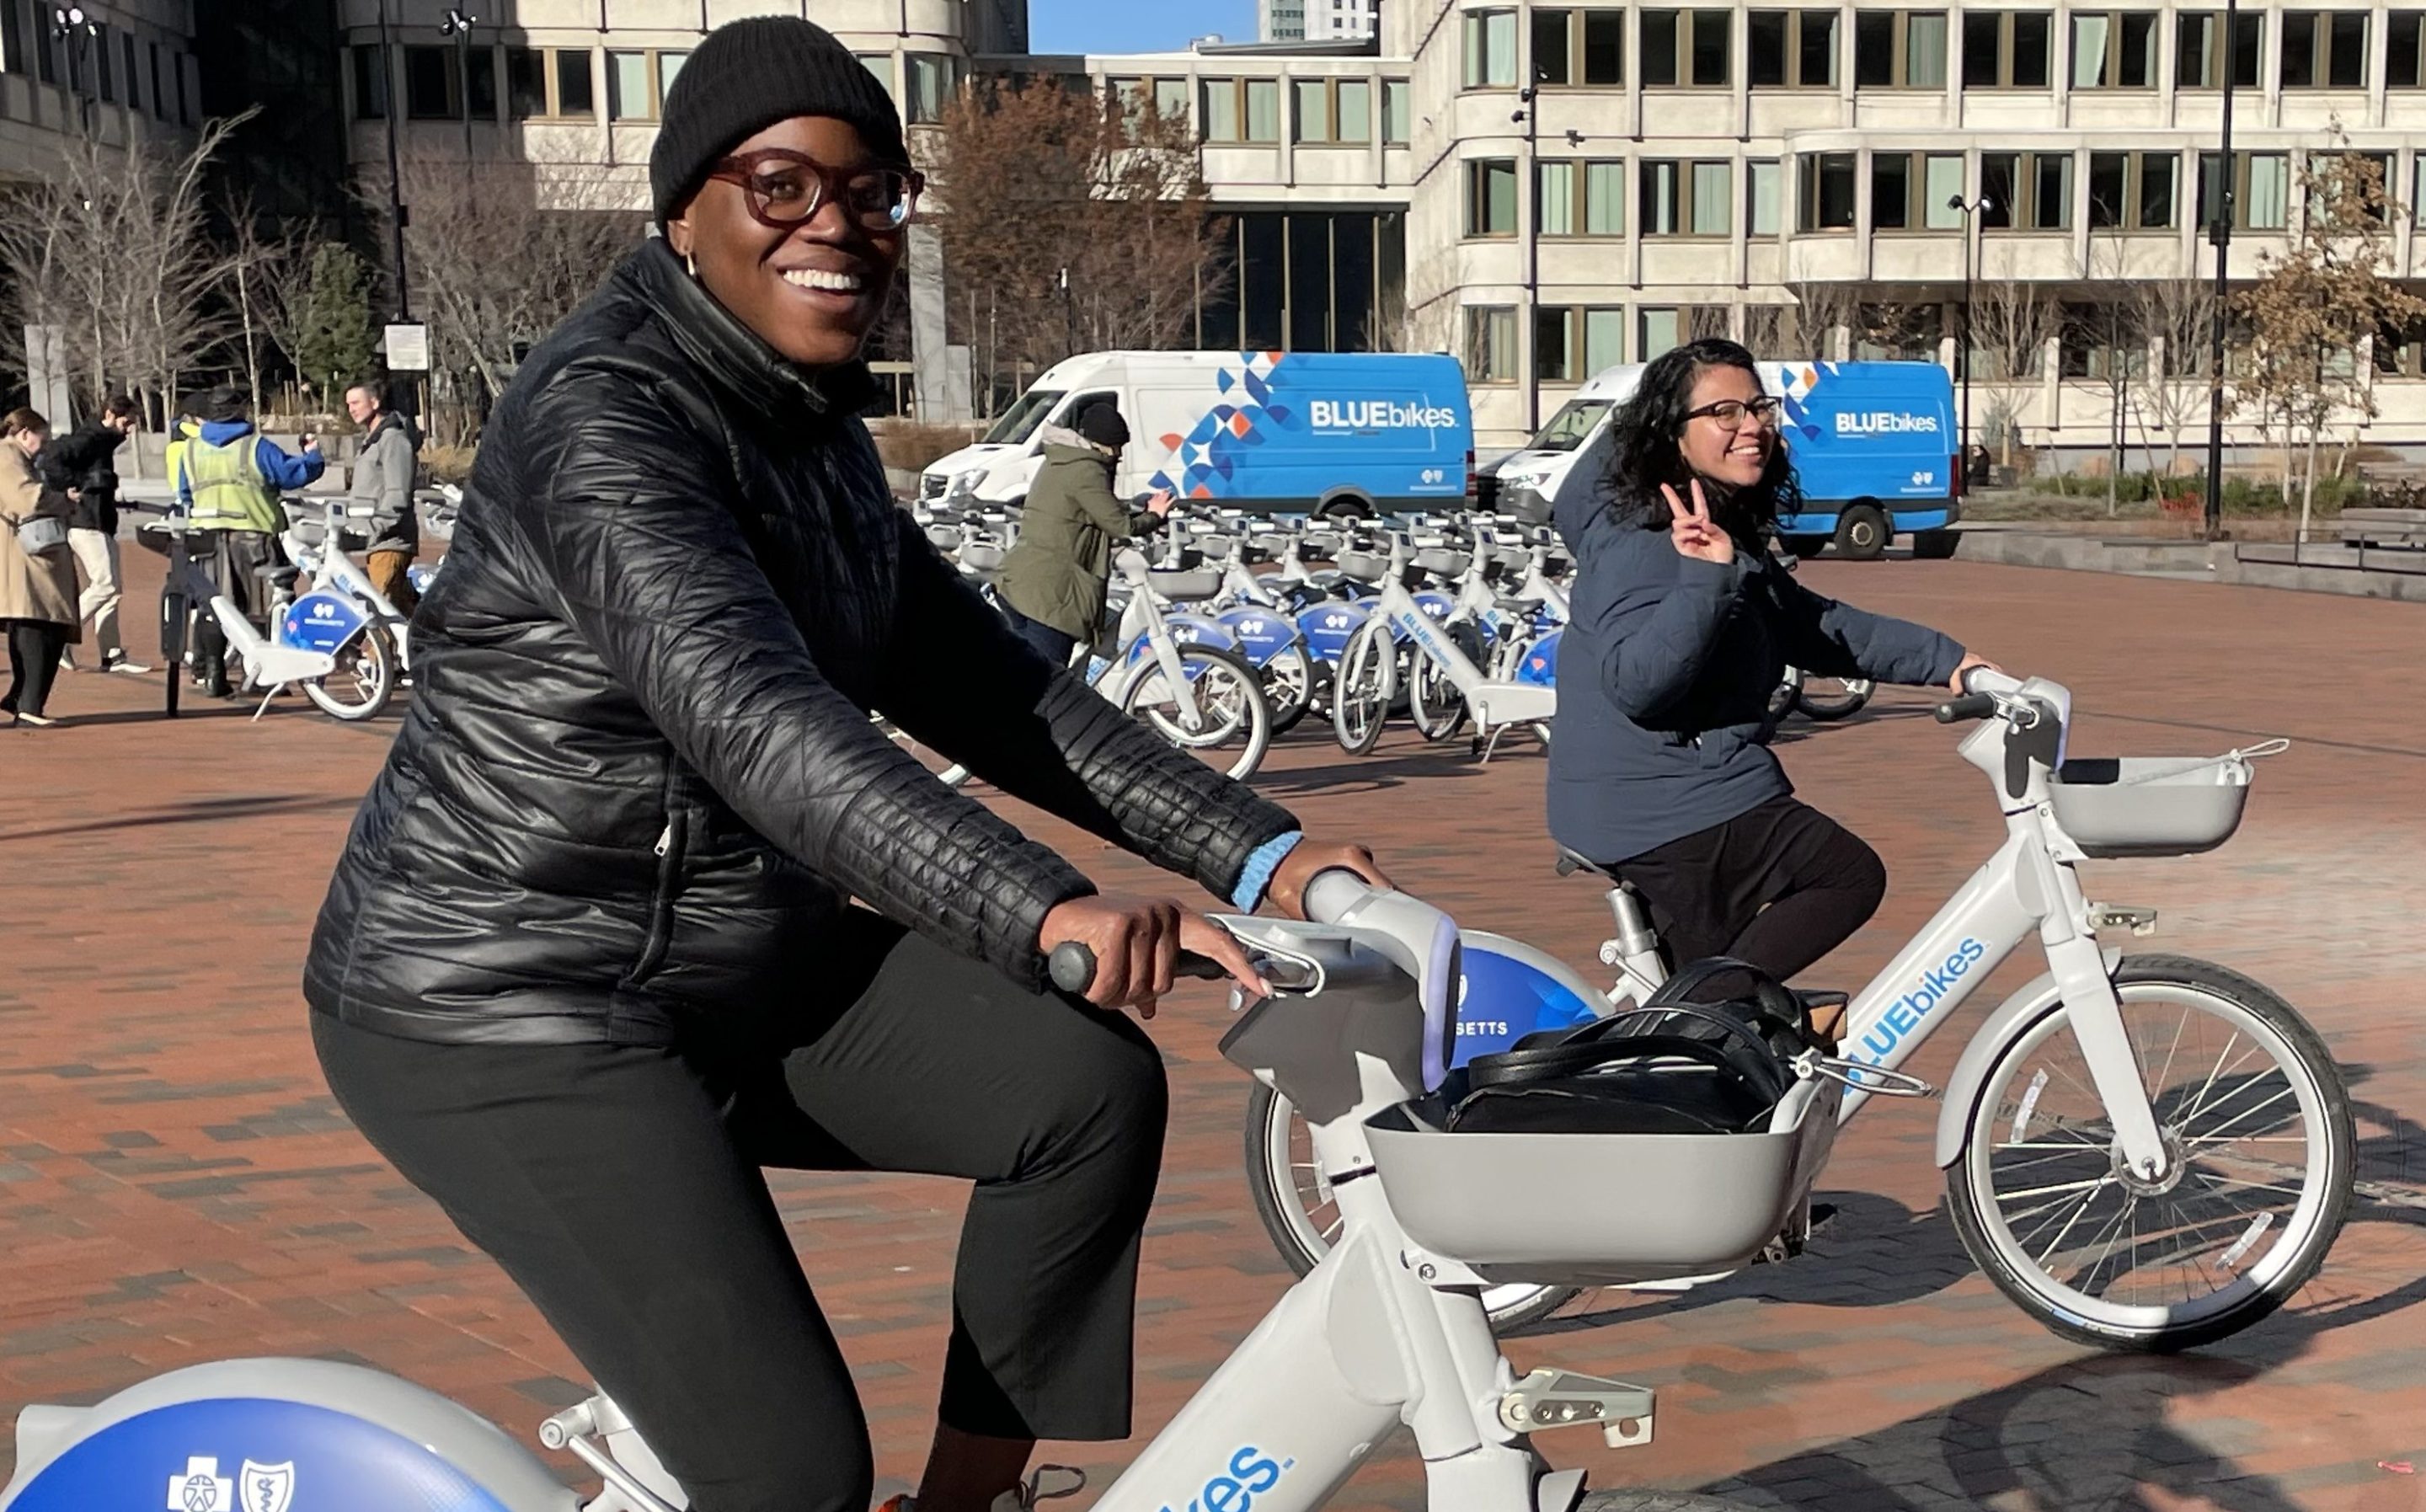 A young black woman with glasses and a black puffy winter coat and a young Hispanic woman in a blue winter coat holding up two fingers in a peace sign pedal on new electric Bluebikes through City Hall Plaza. Behind them are rows of more new bikes and office buildings in the distance.